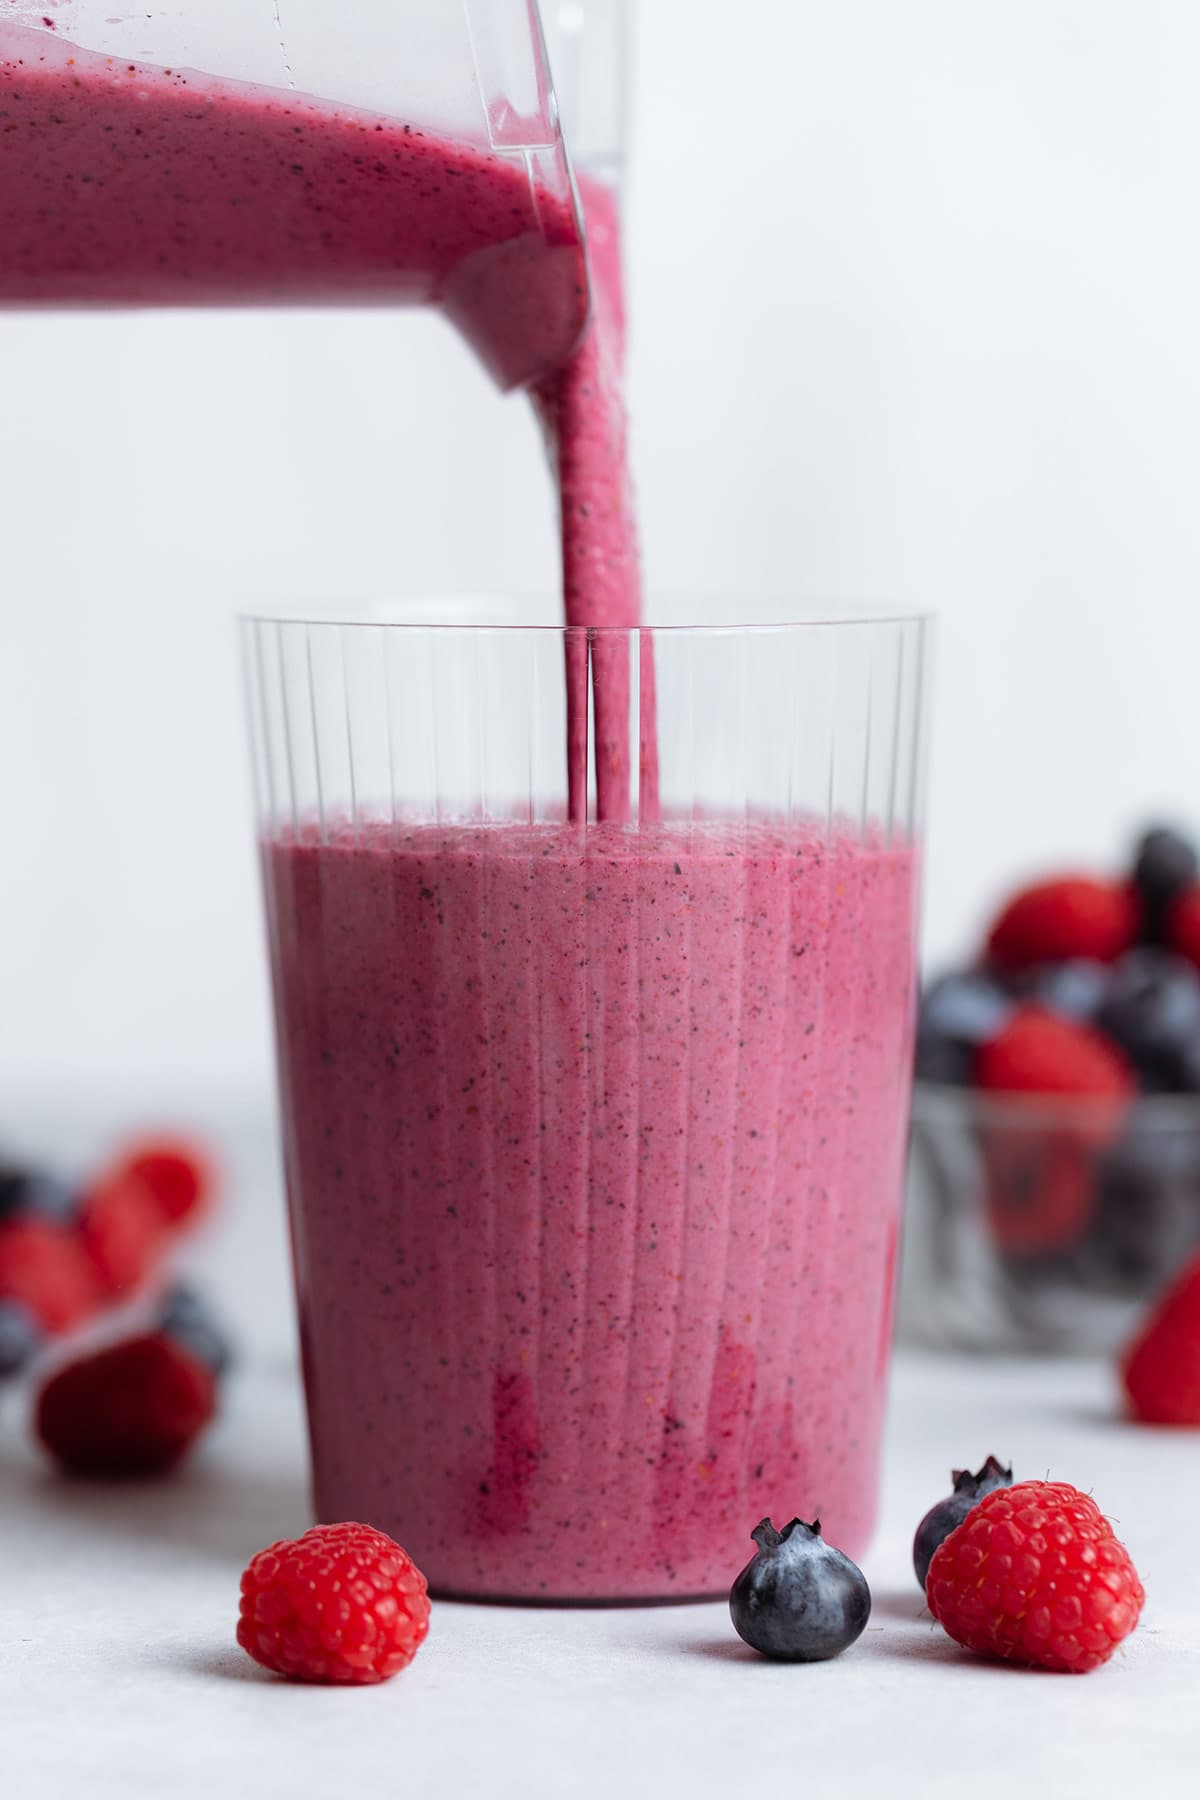 Bright pink smoothie being poured into a tall glass.